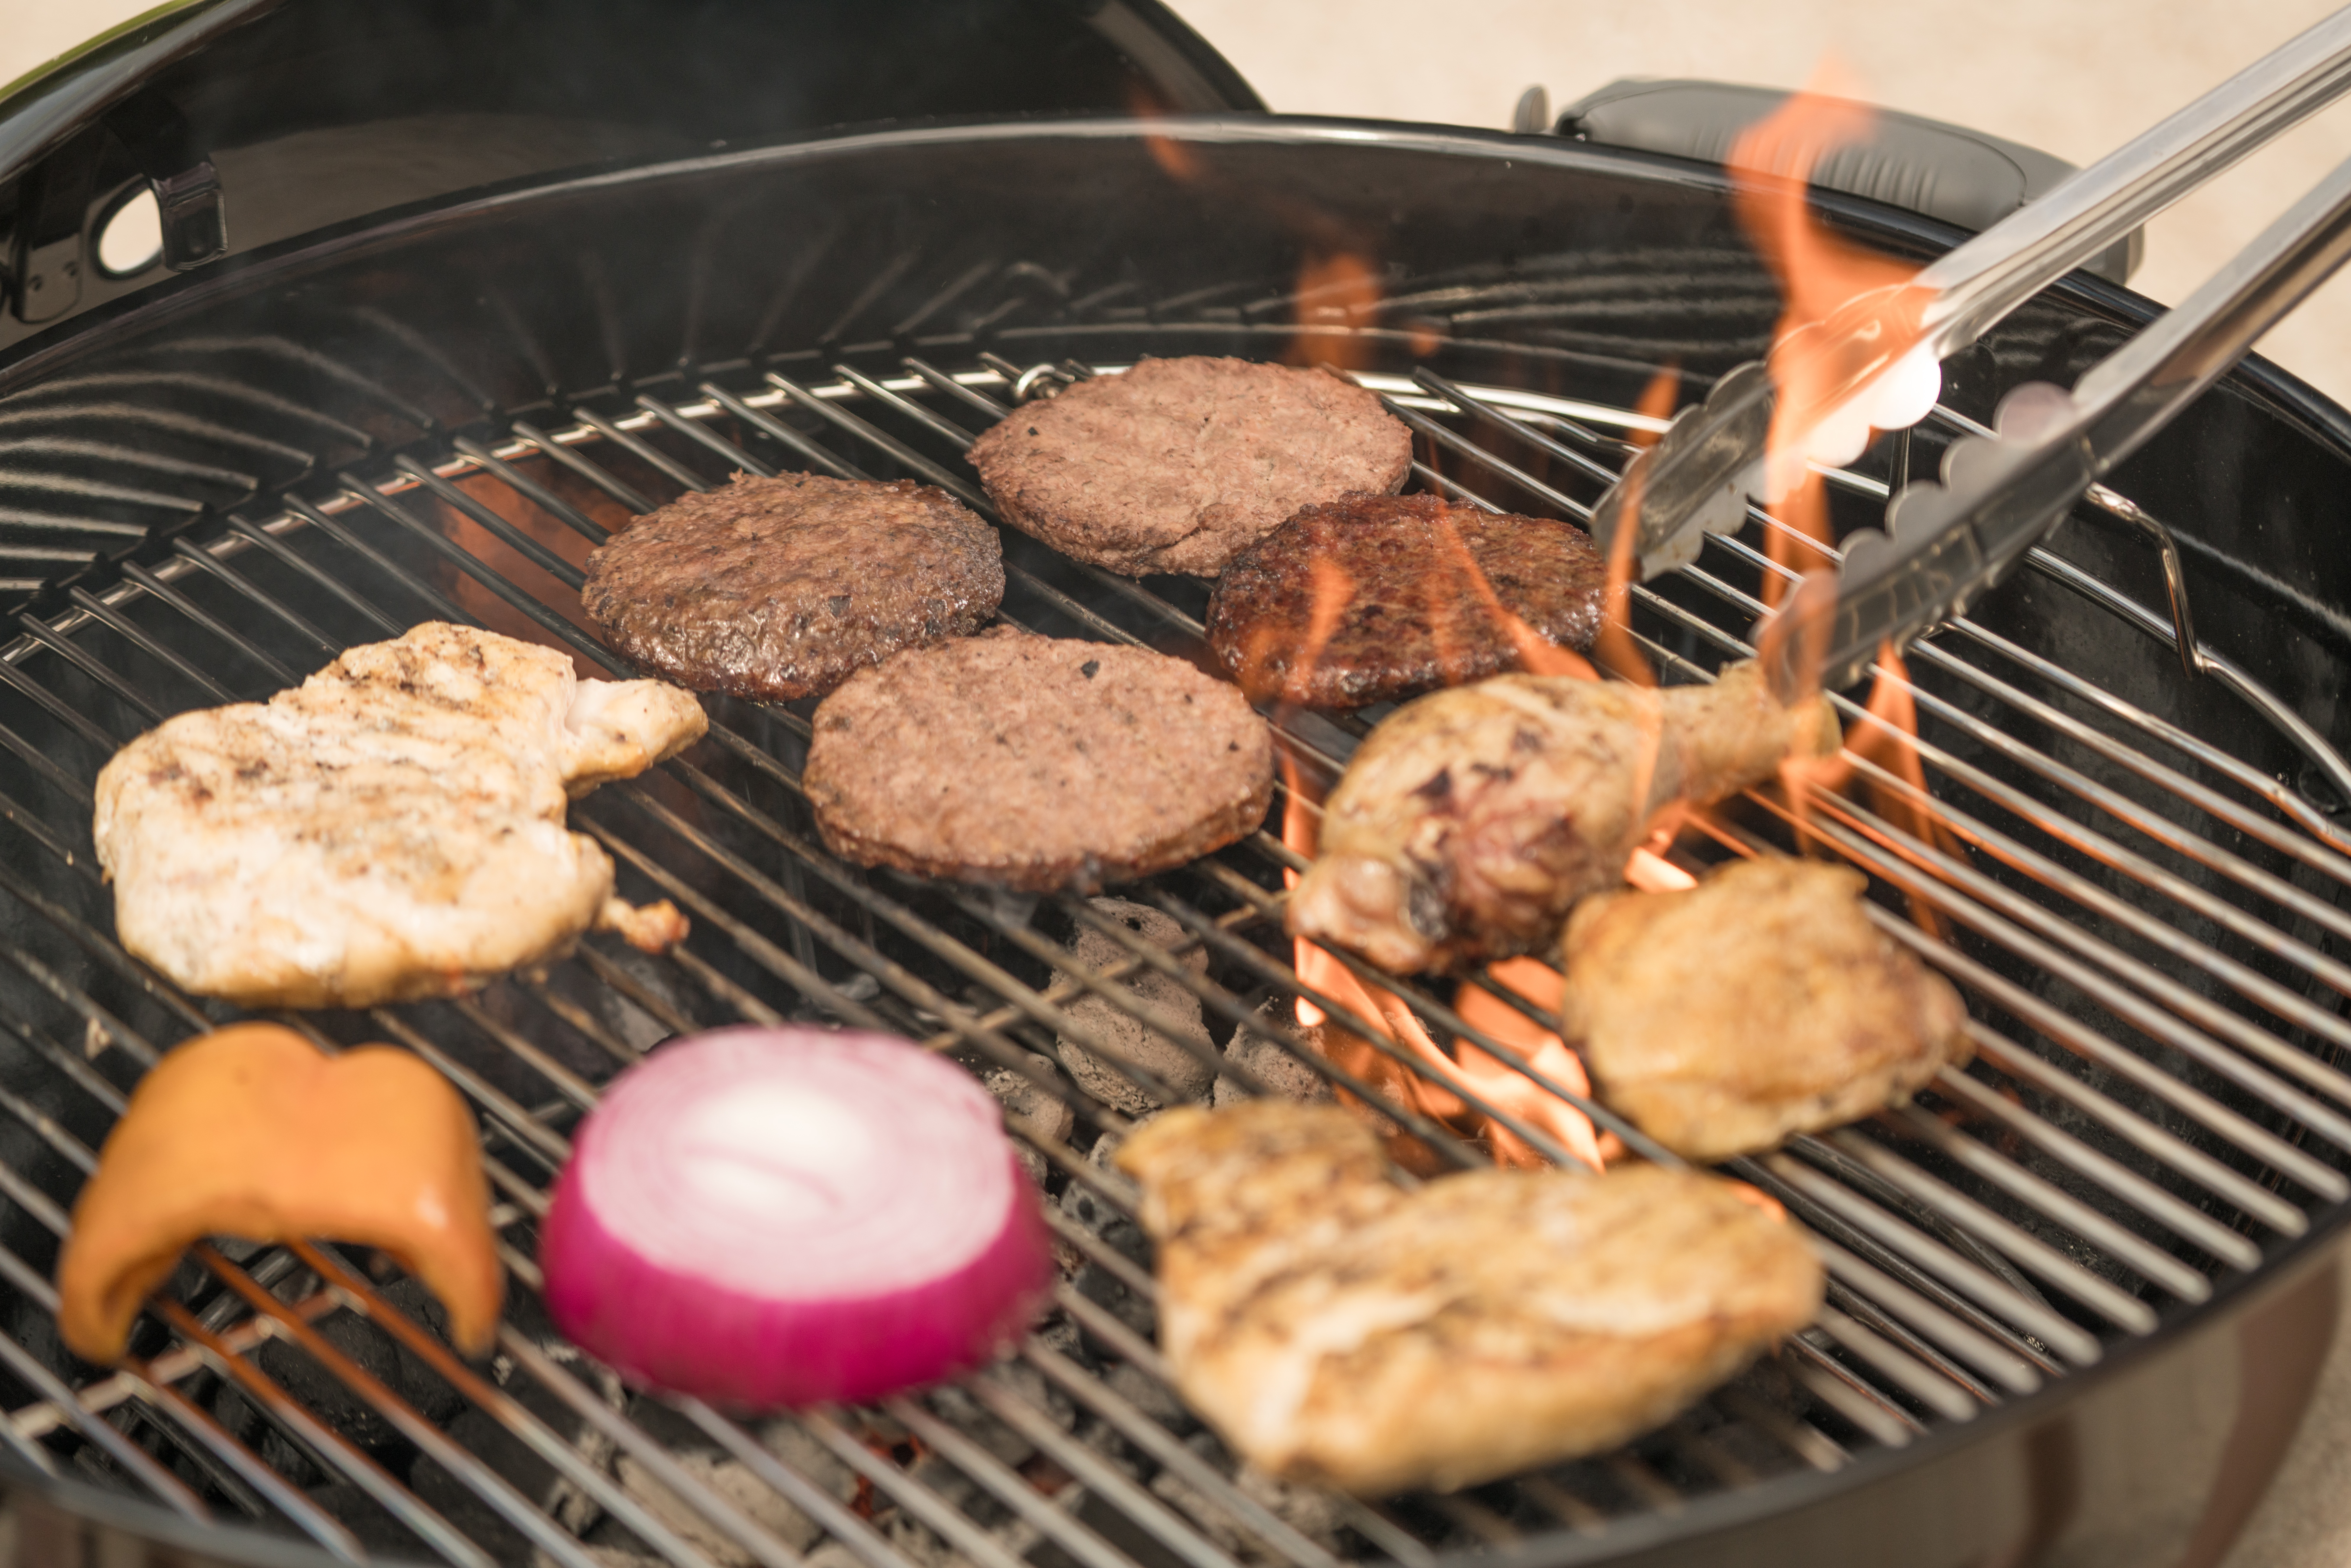 How to grill burgers on a propane grill for summer barbecues